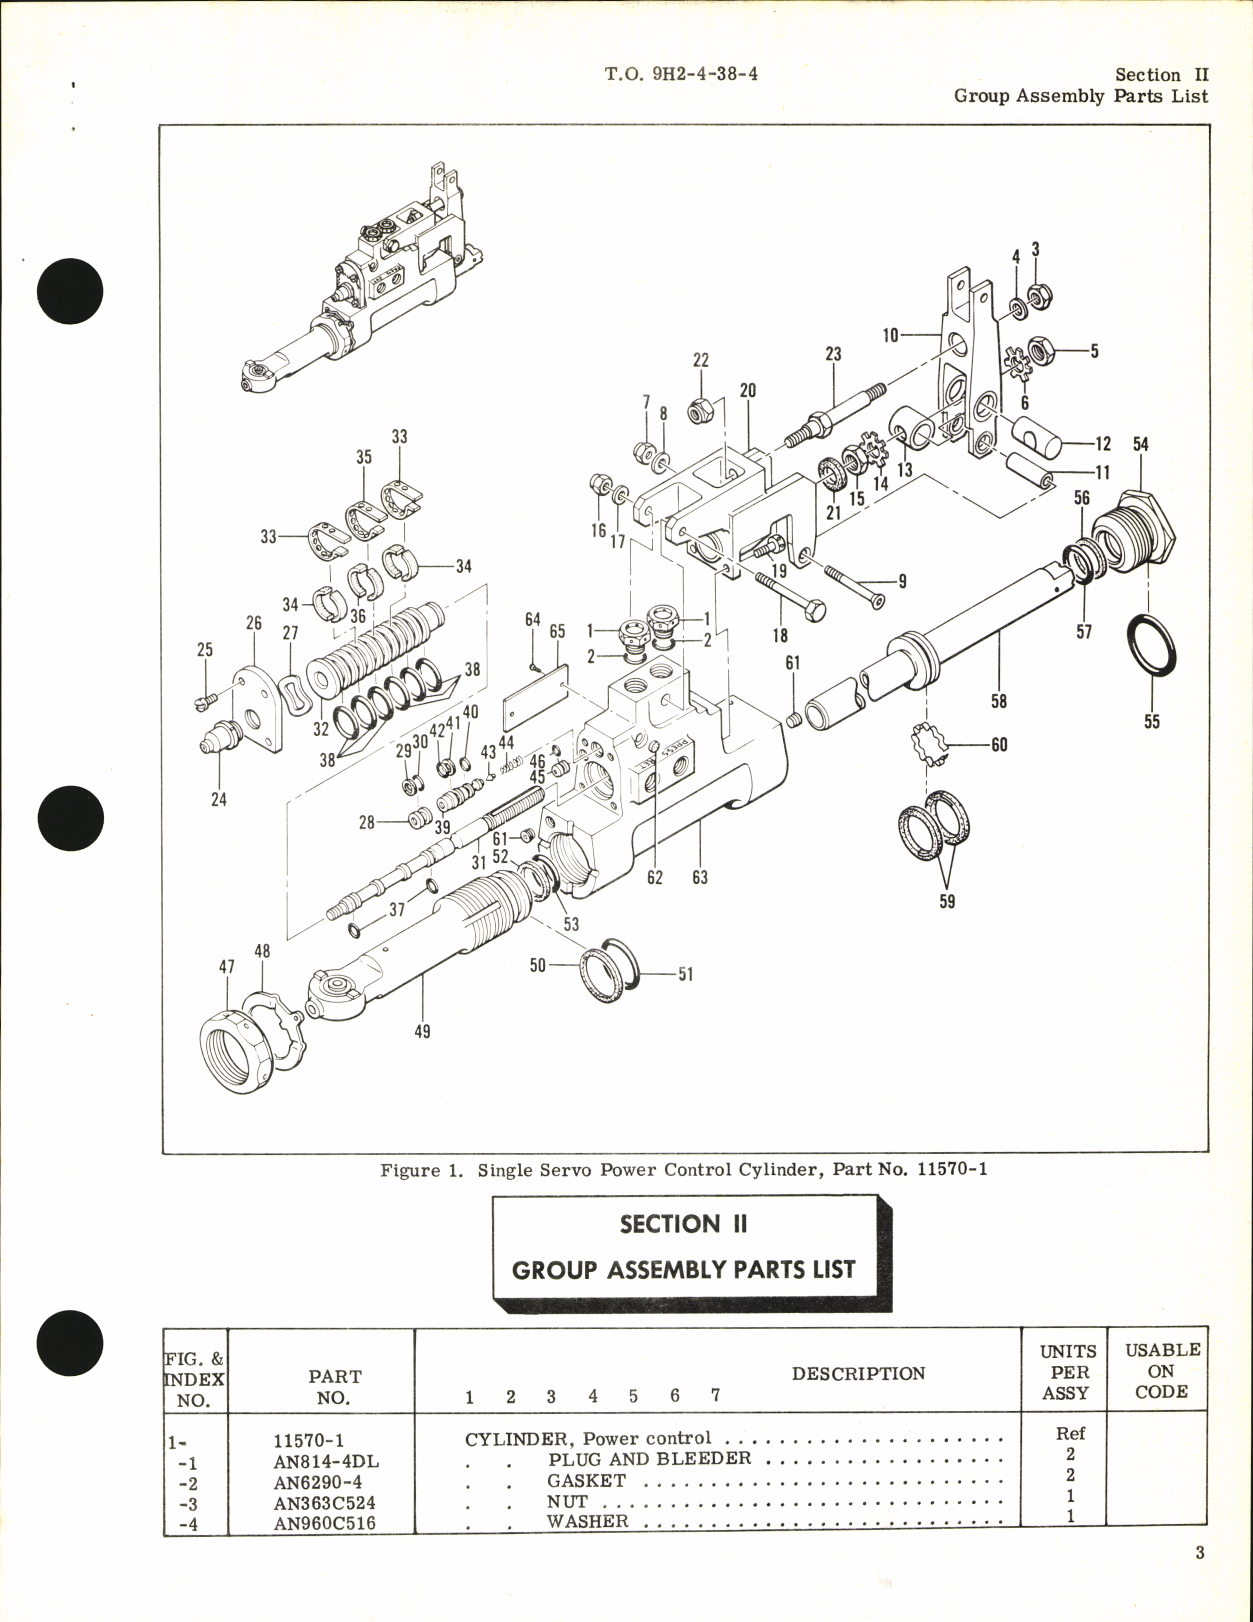 Sample page 5 from AirCorps Library document: Illustrated Parts Breakdown for Single Servo Power Control cylinder Part No. 11570-1